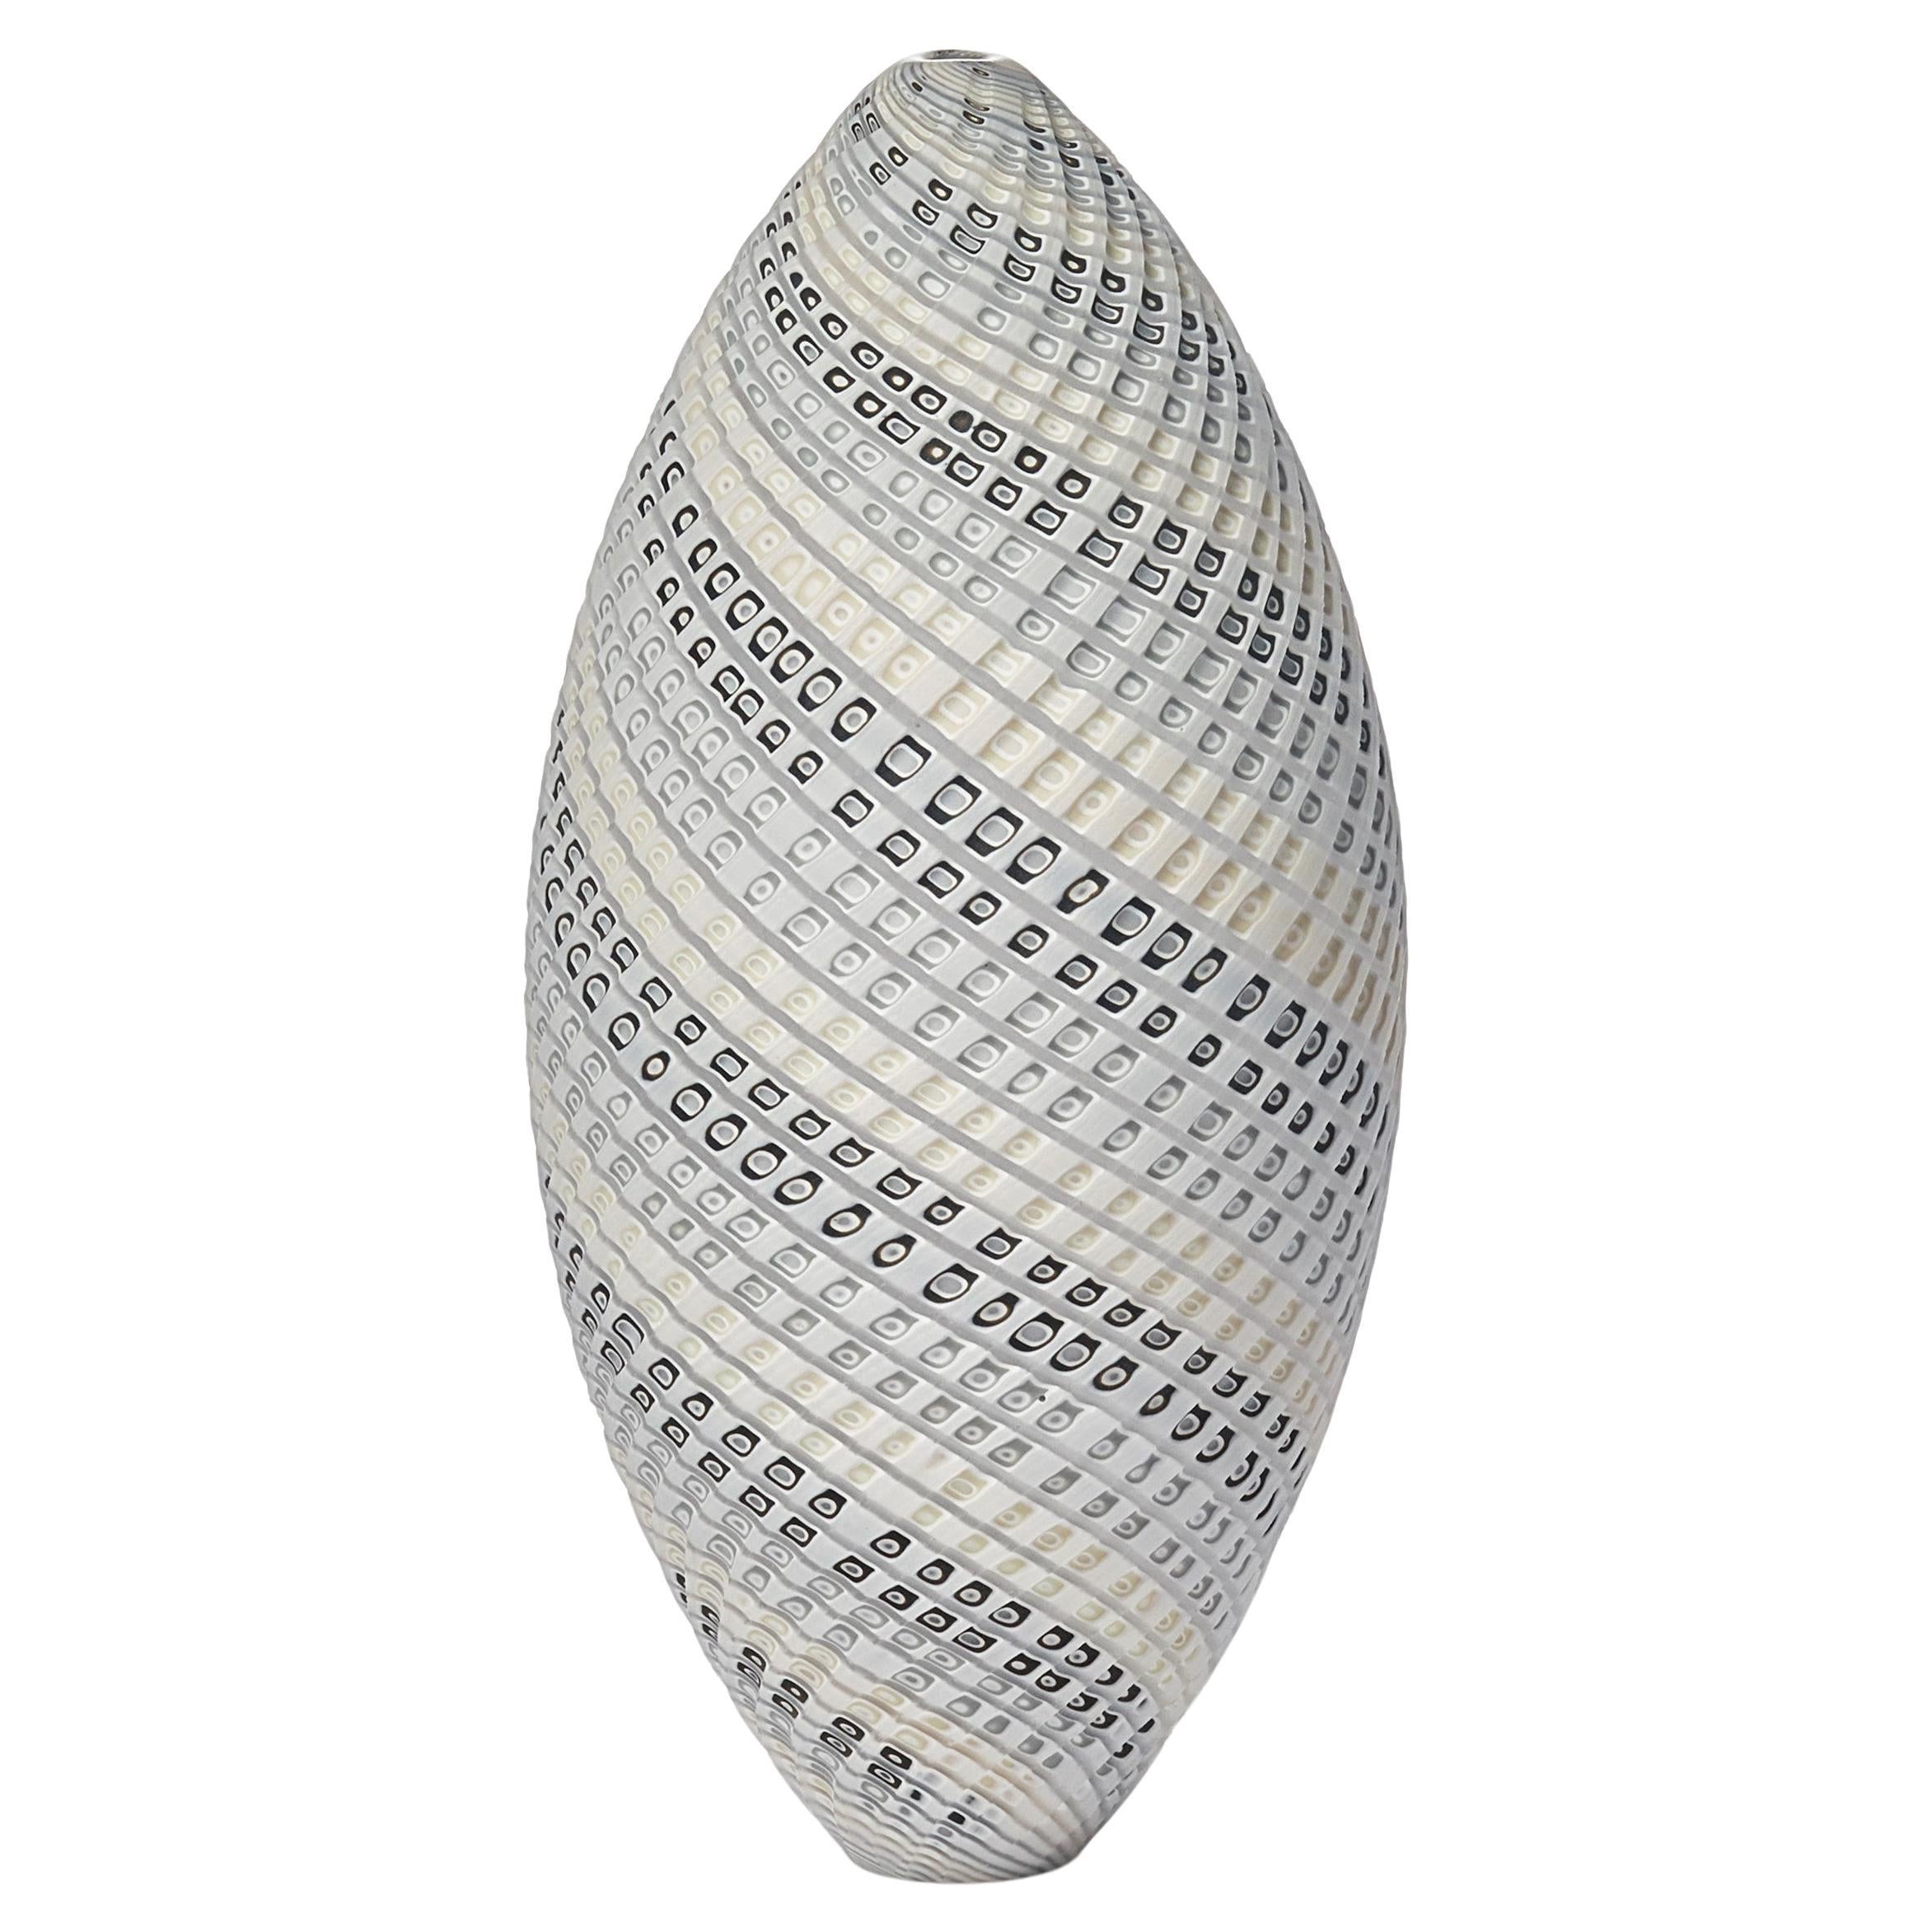 Woven Two Tone Ovoid (med), neutral pastel handblown glass vessel by Layne Rowe For Sale